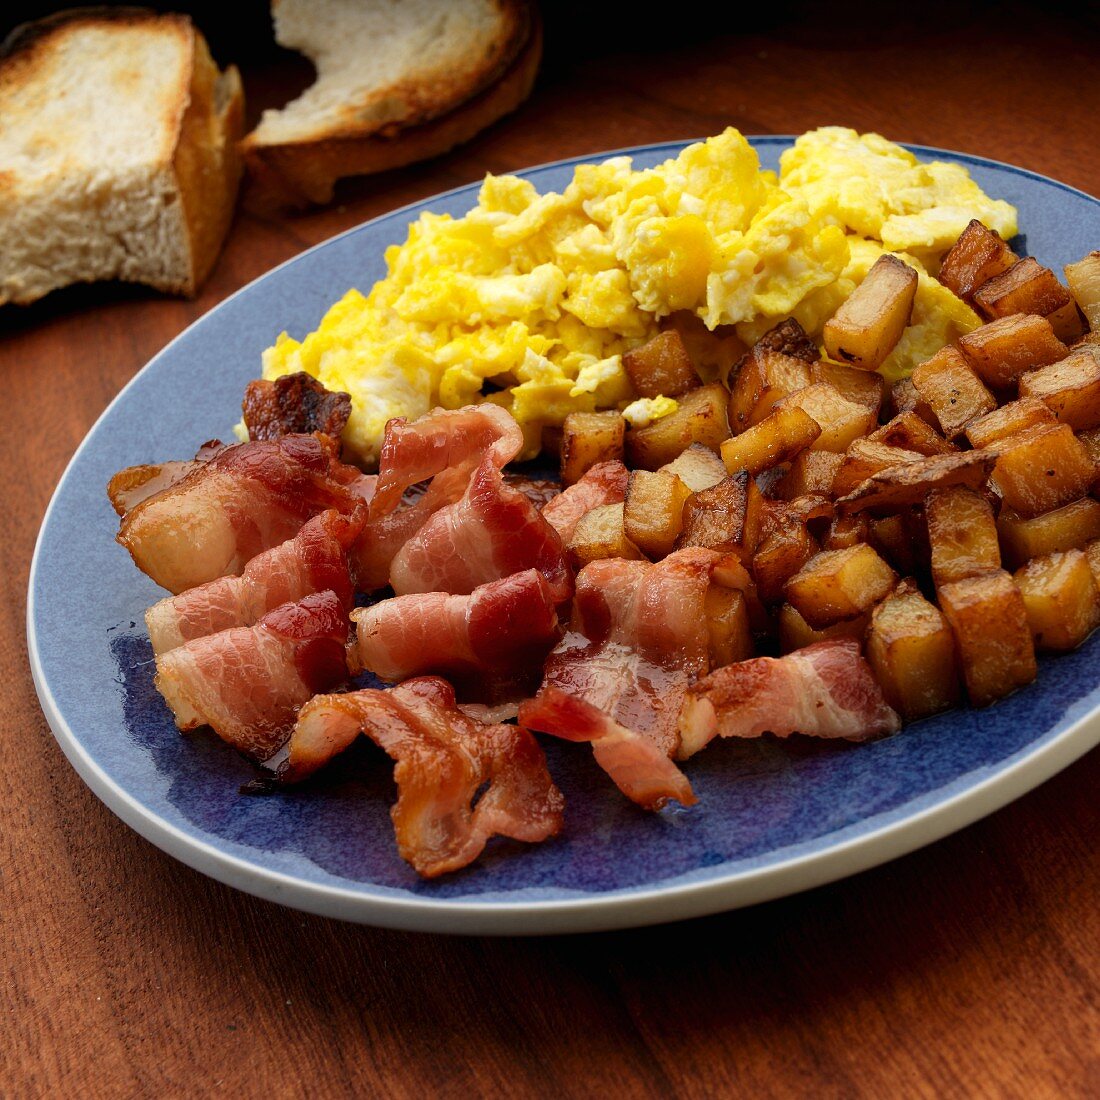 Scrambled egg with American bacon and fried potatoes